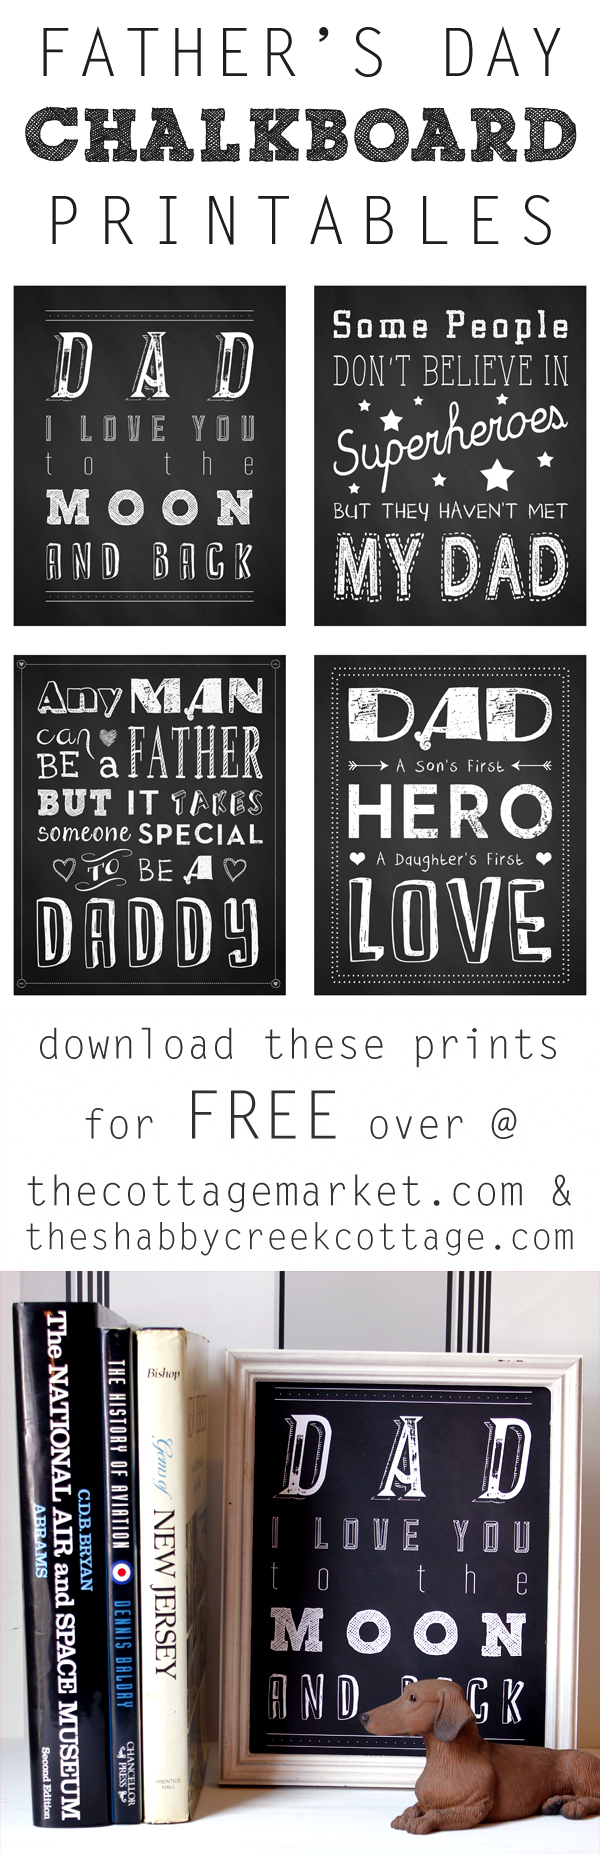 BK Chalkboard Effect Fathers Day Card For Dad / Stepdad From Your Little Man 